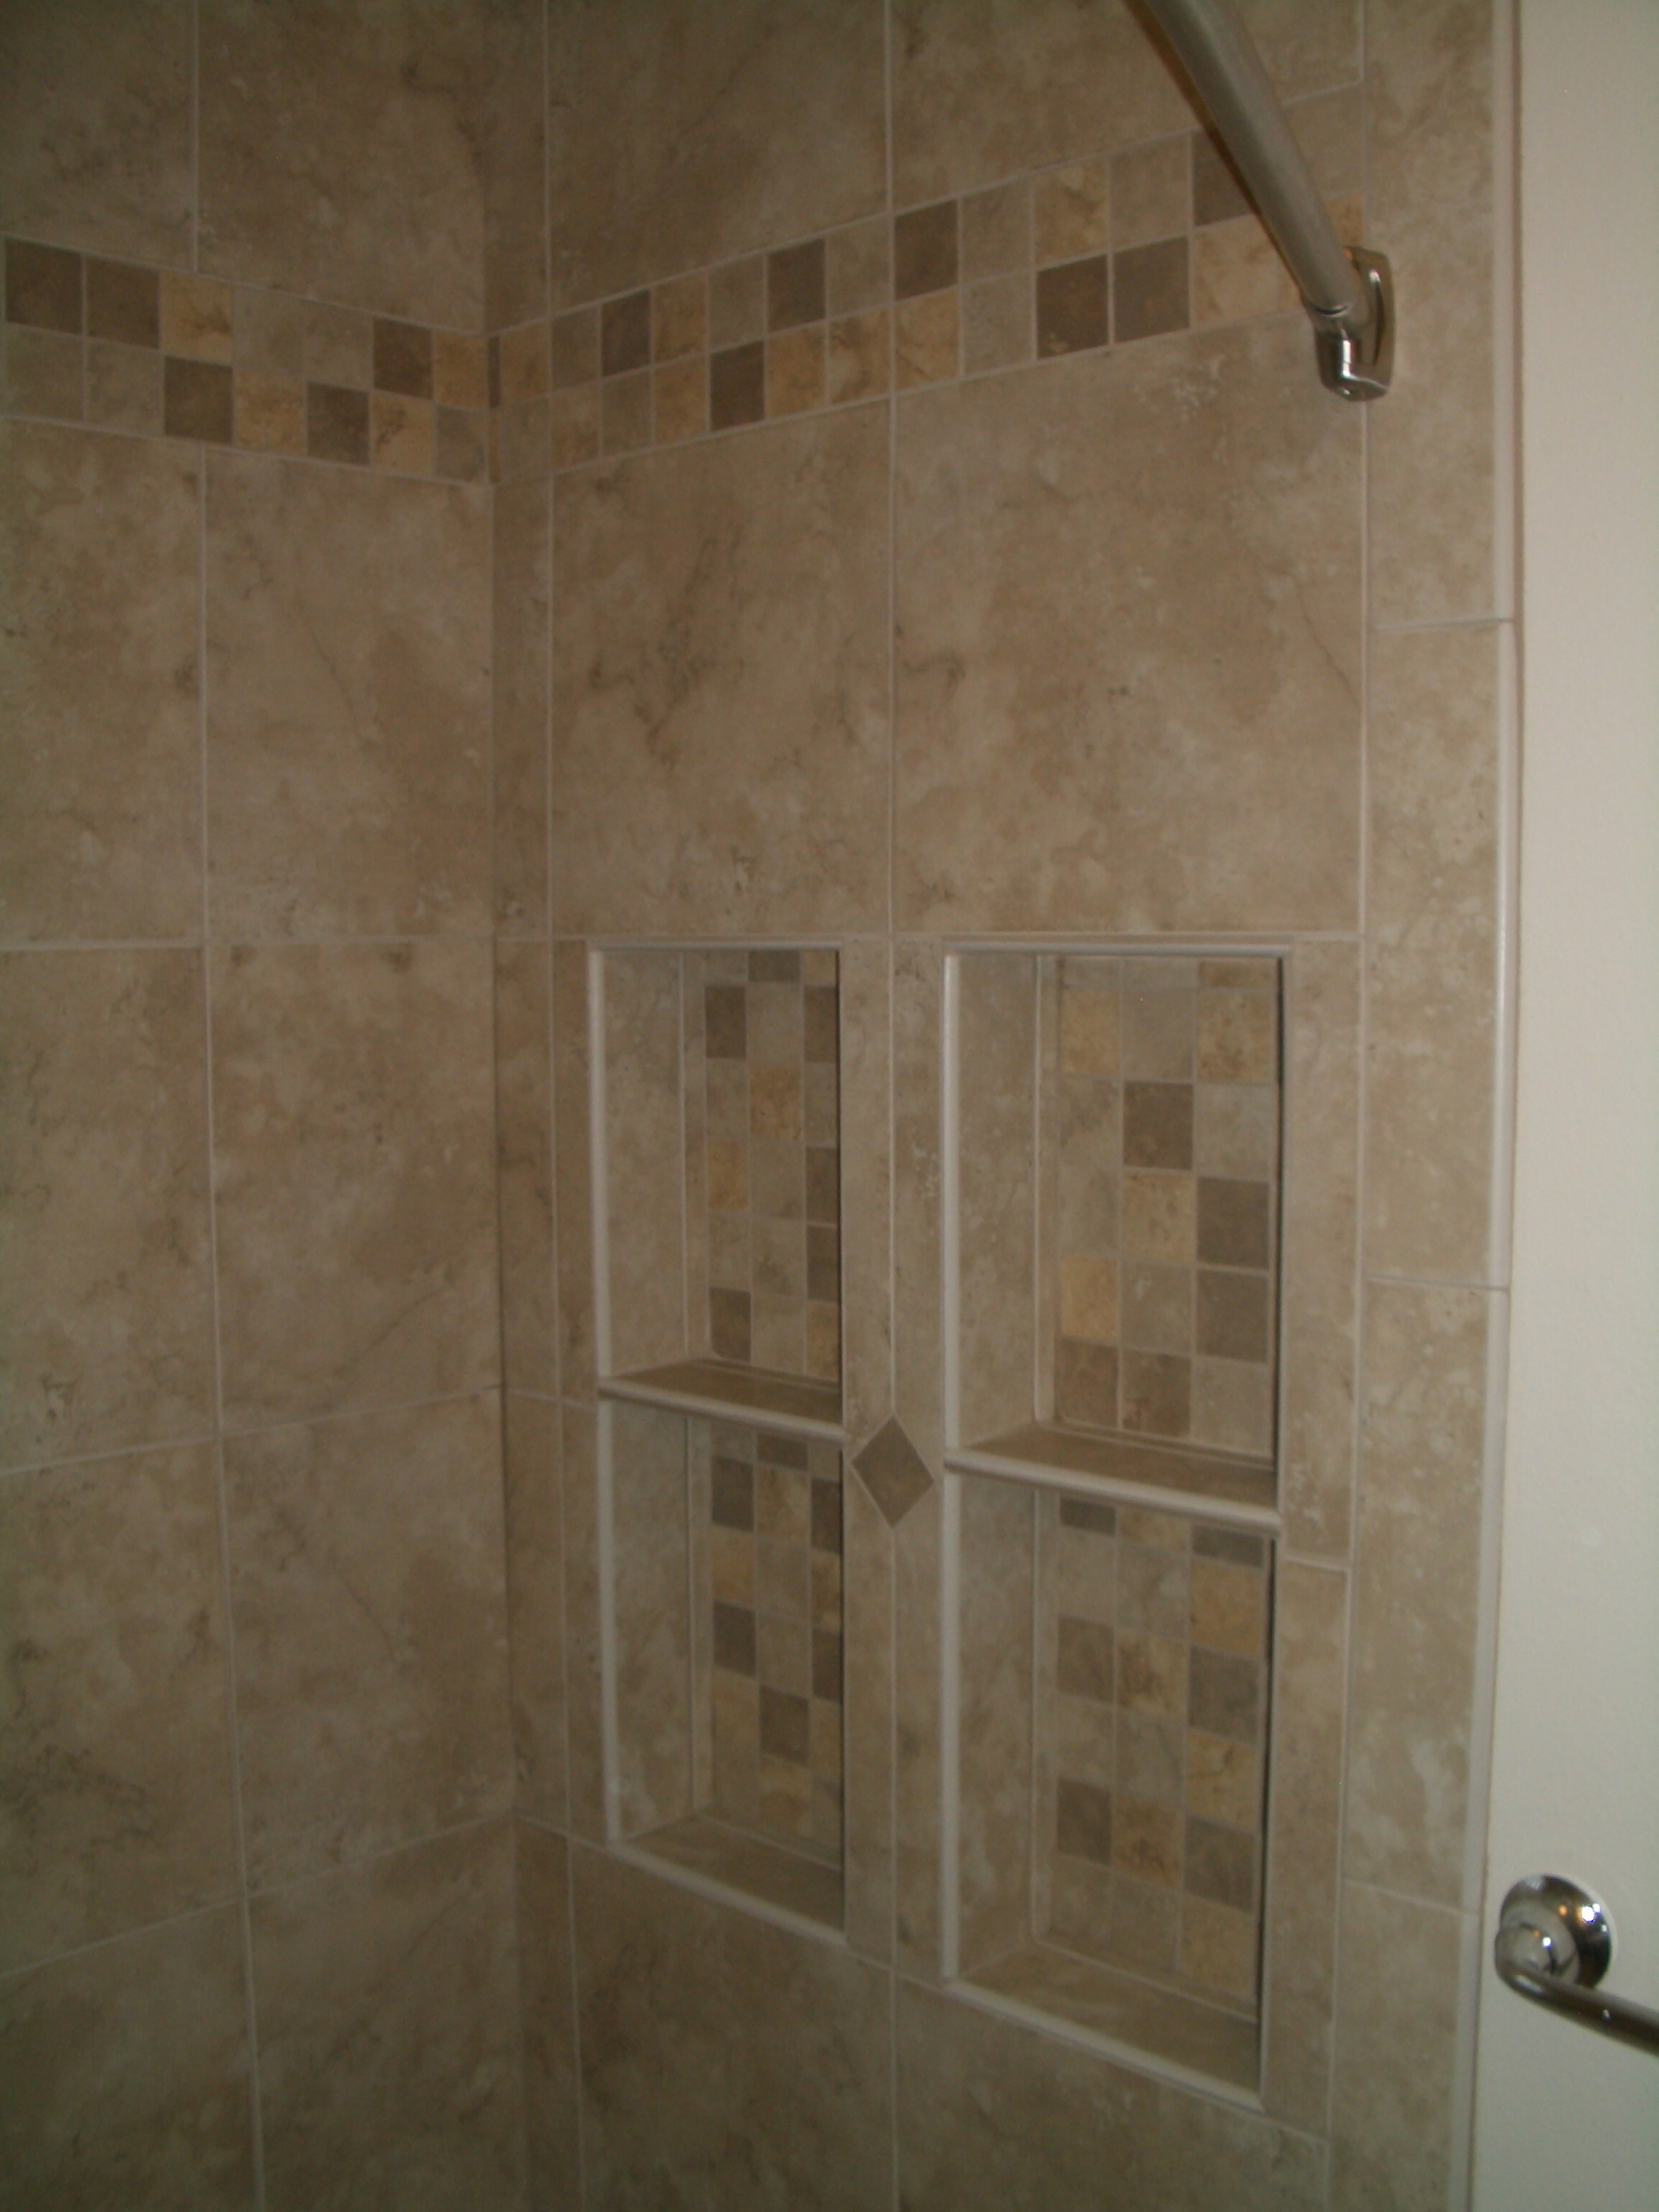 Drywall To Backerboard Transition In Tiled Showers